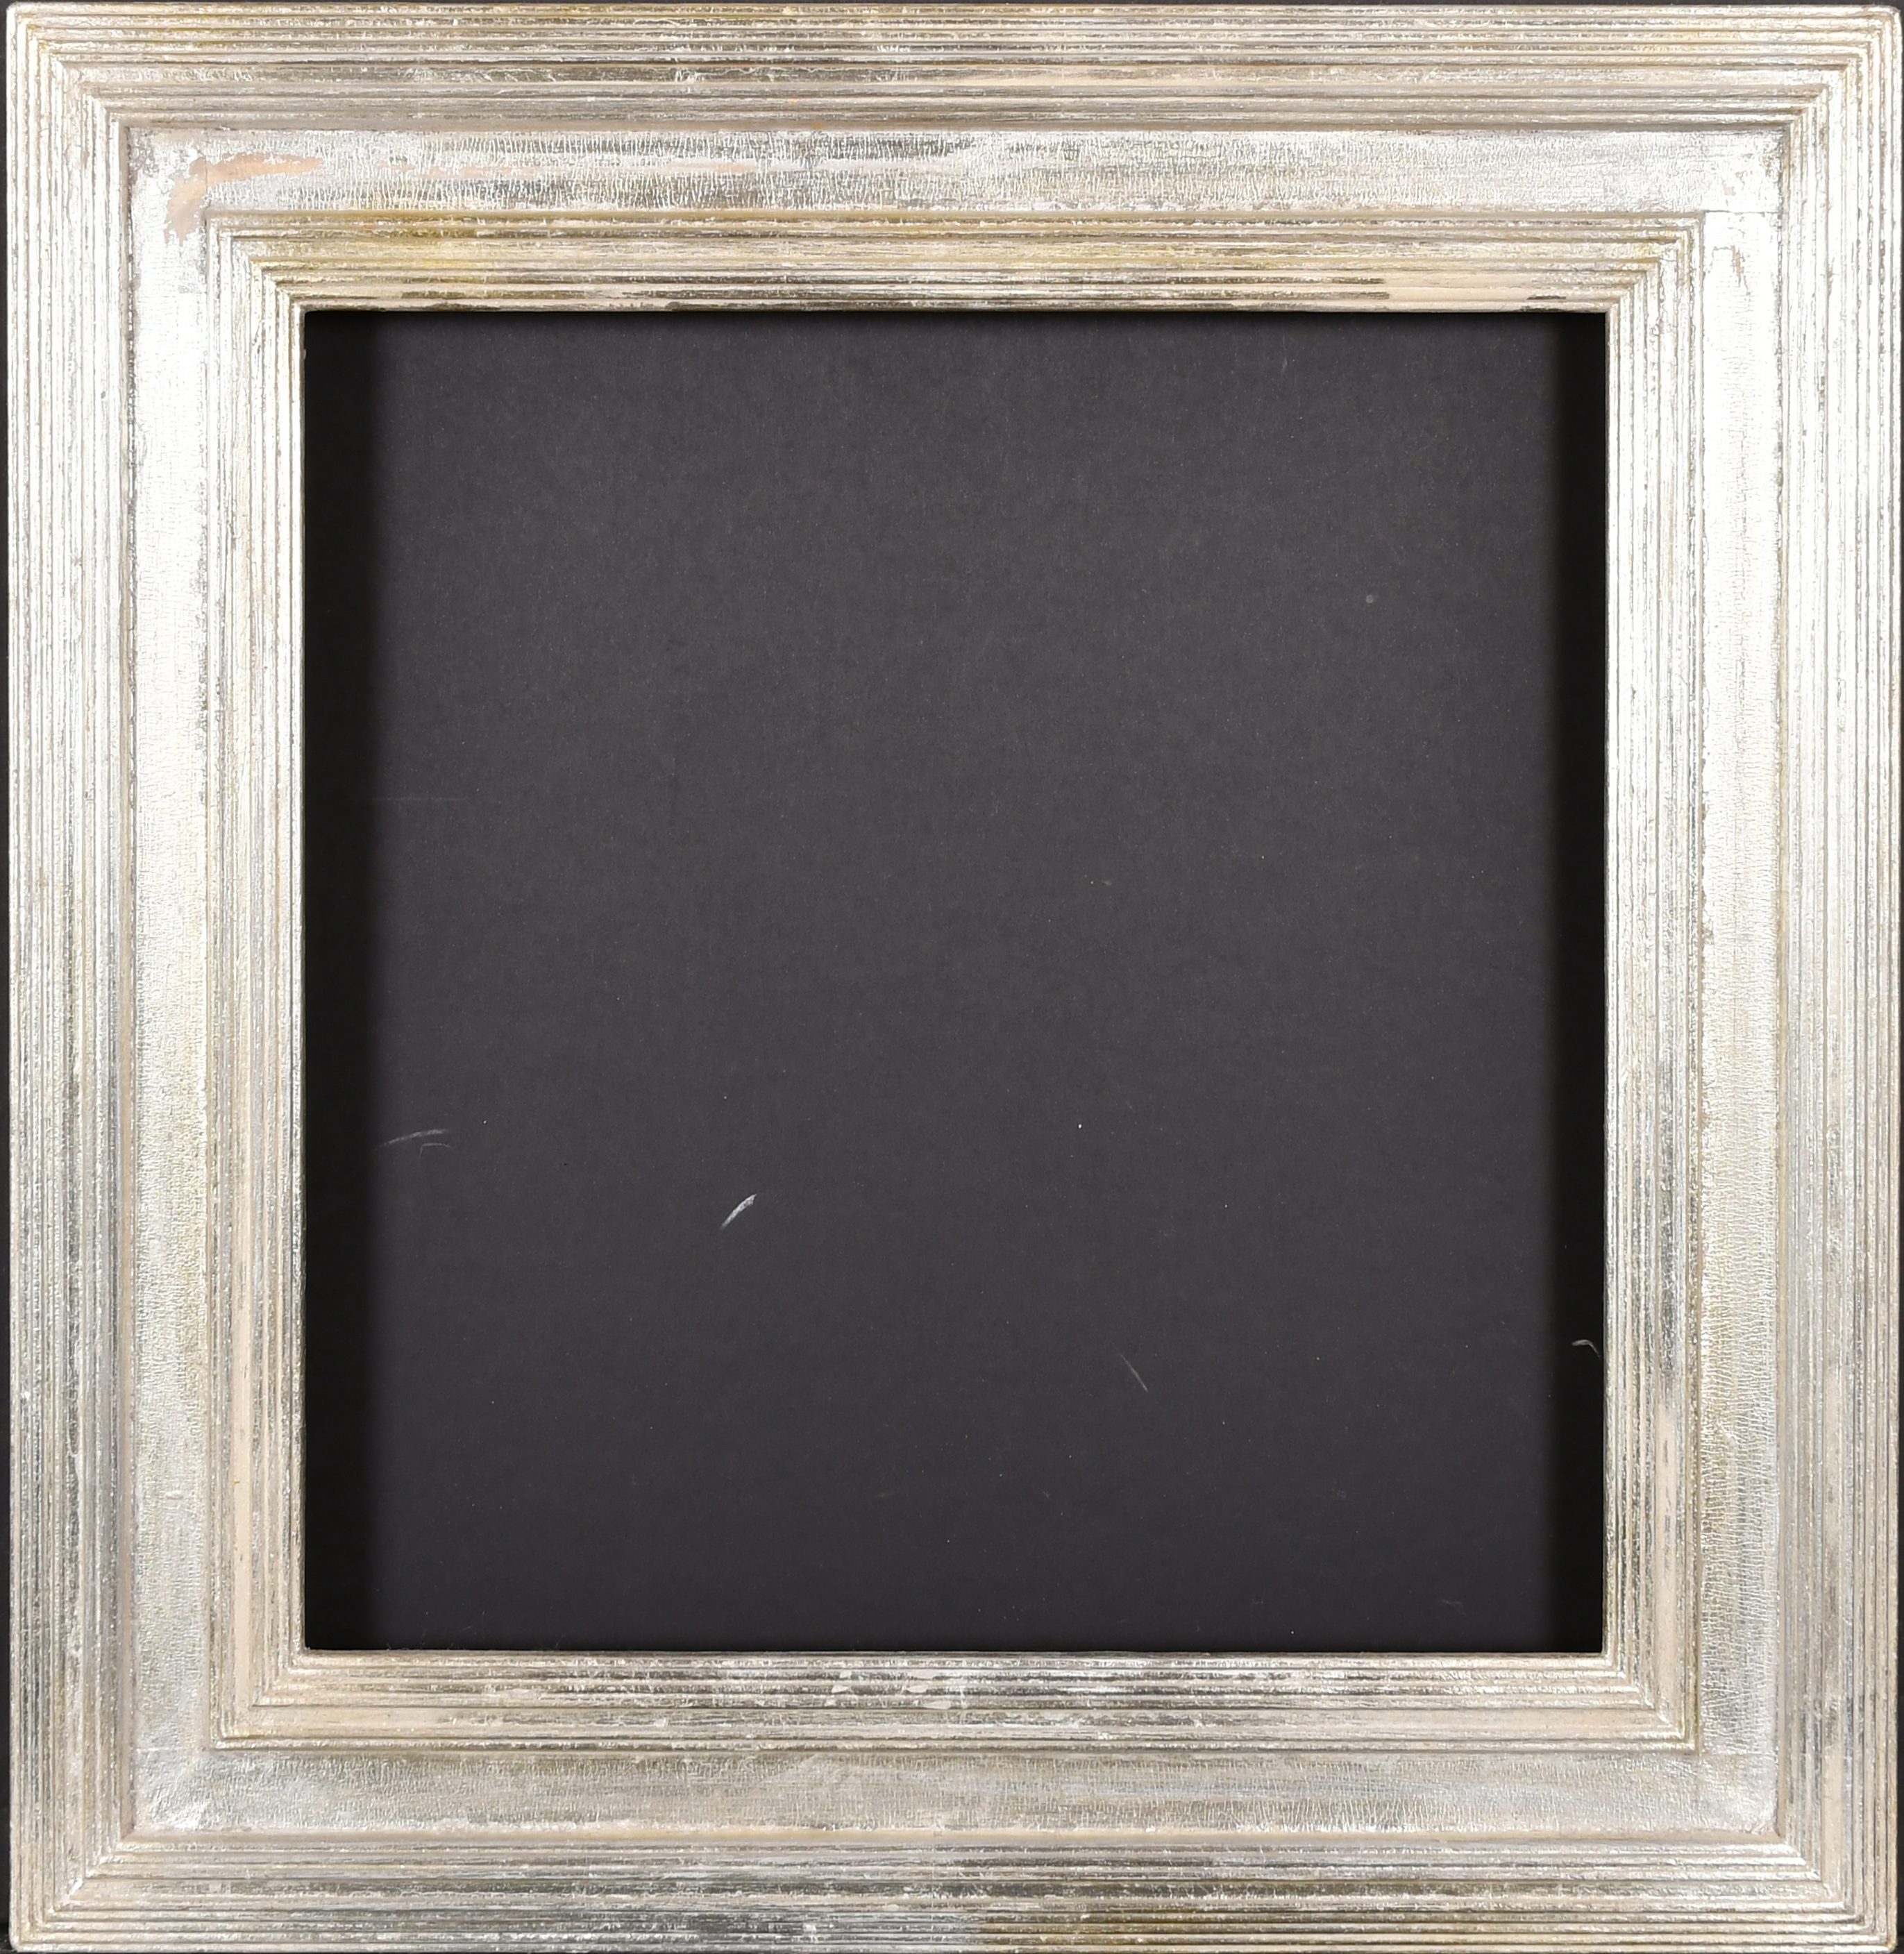 20th-21st Century English School. A Silver Painted Frame, rebate 12" x 12" (30.5 x 30.5cm) - Image 2 of 3